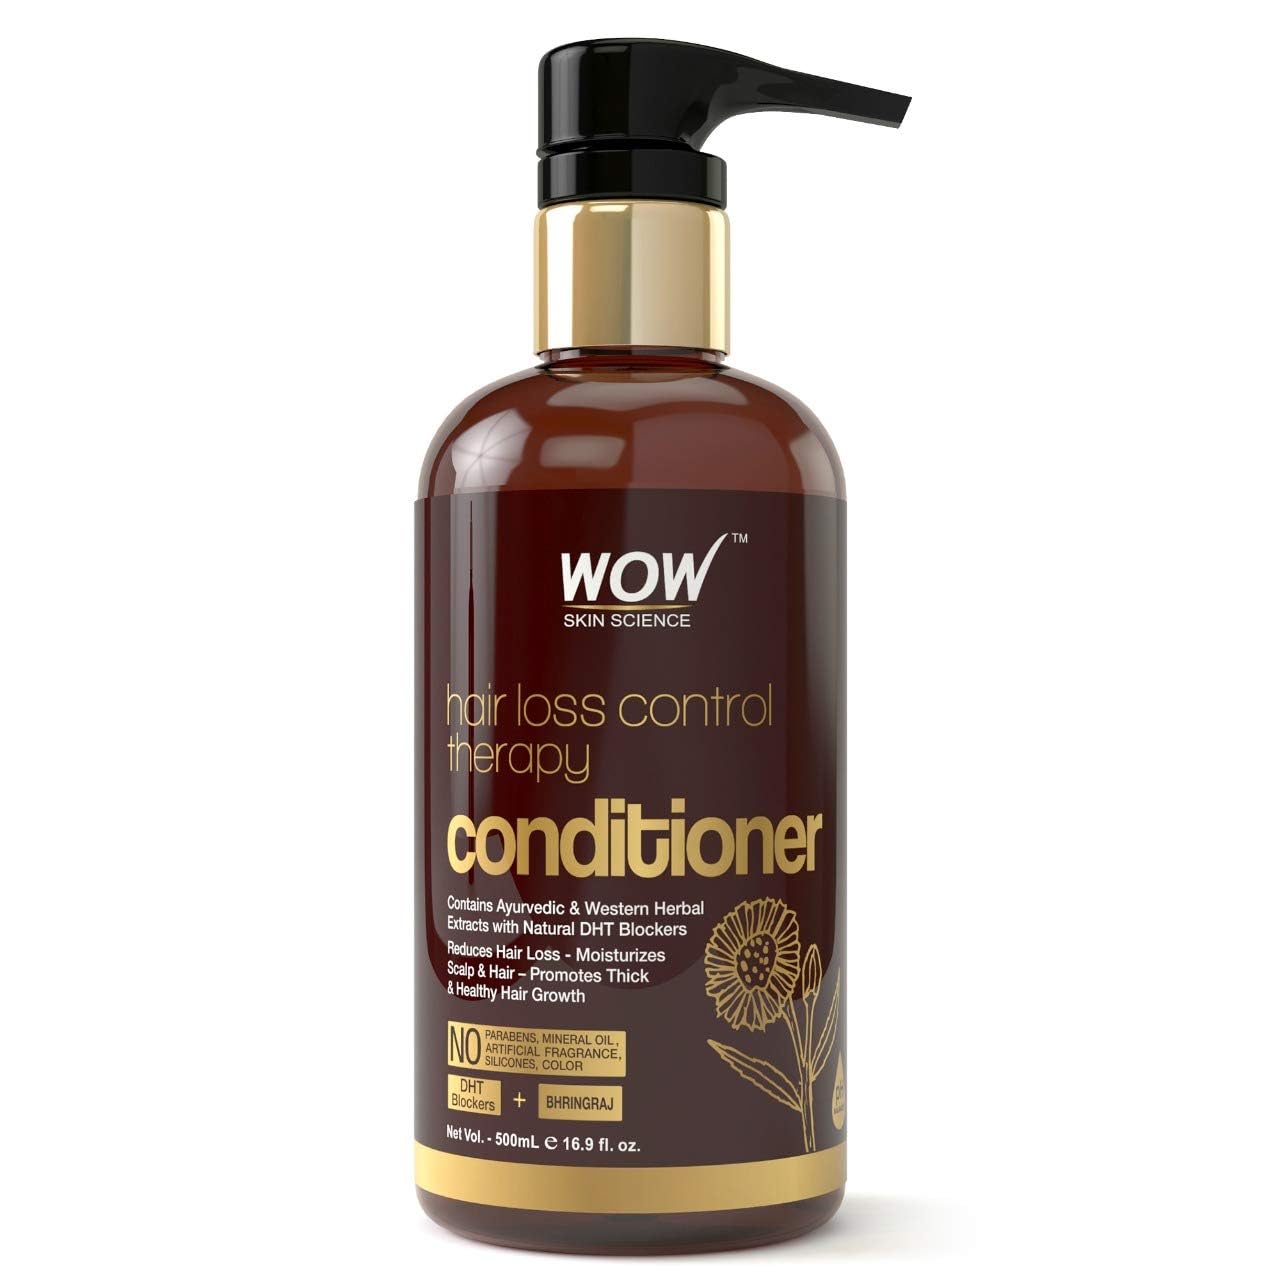 WOW Skin Science Hair Loss Control Therapy Conditioner - 500 ml